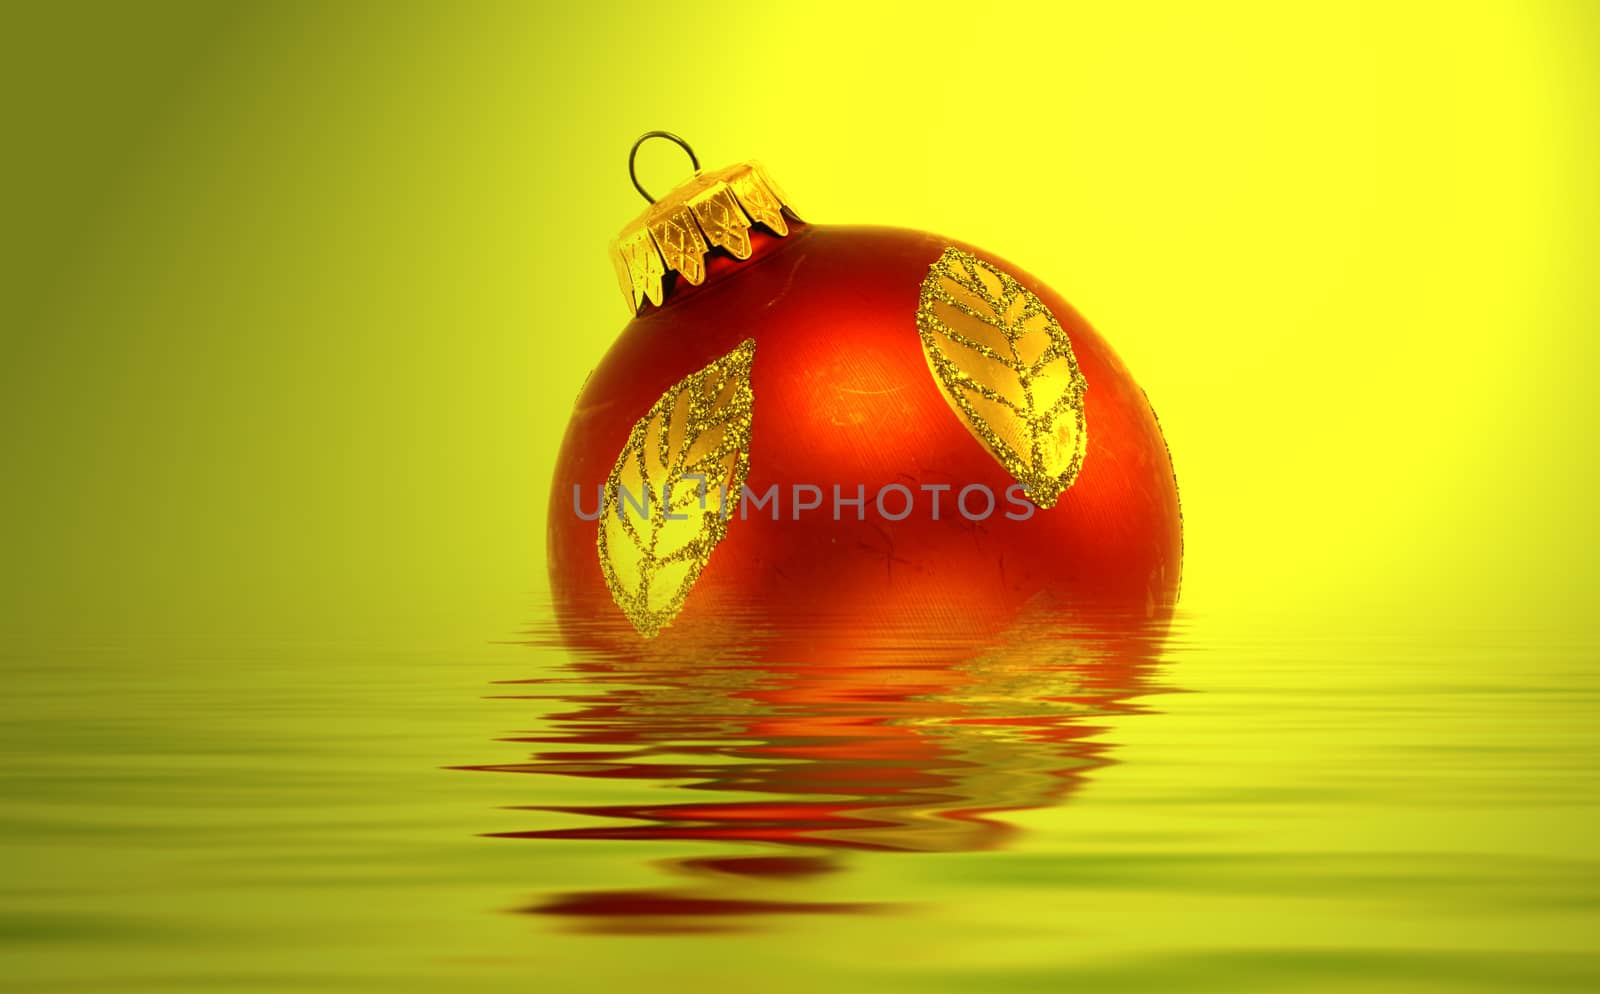 Great RED christmas globe - in water